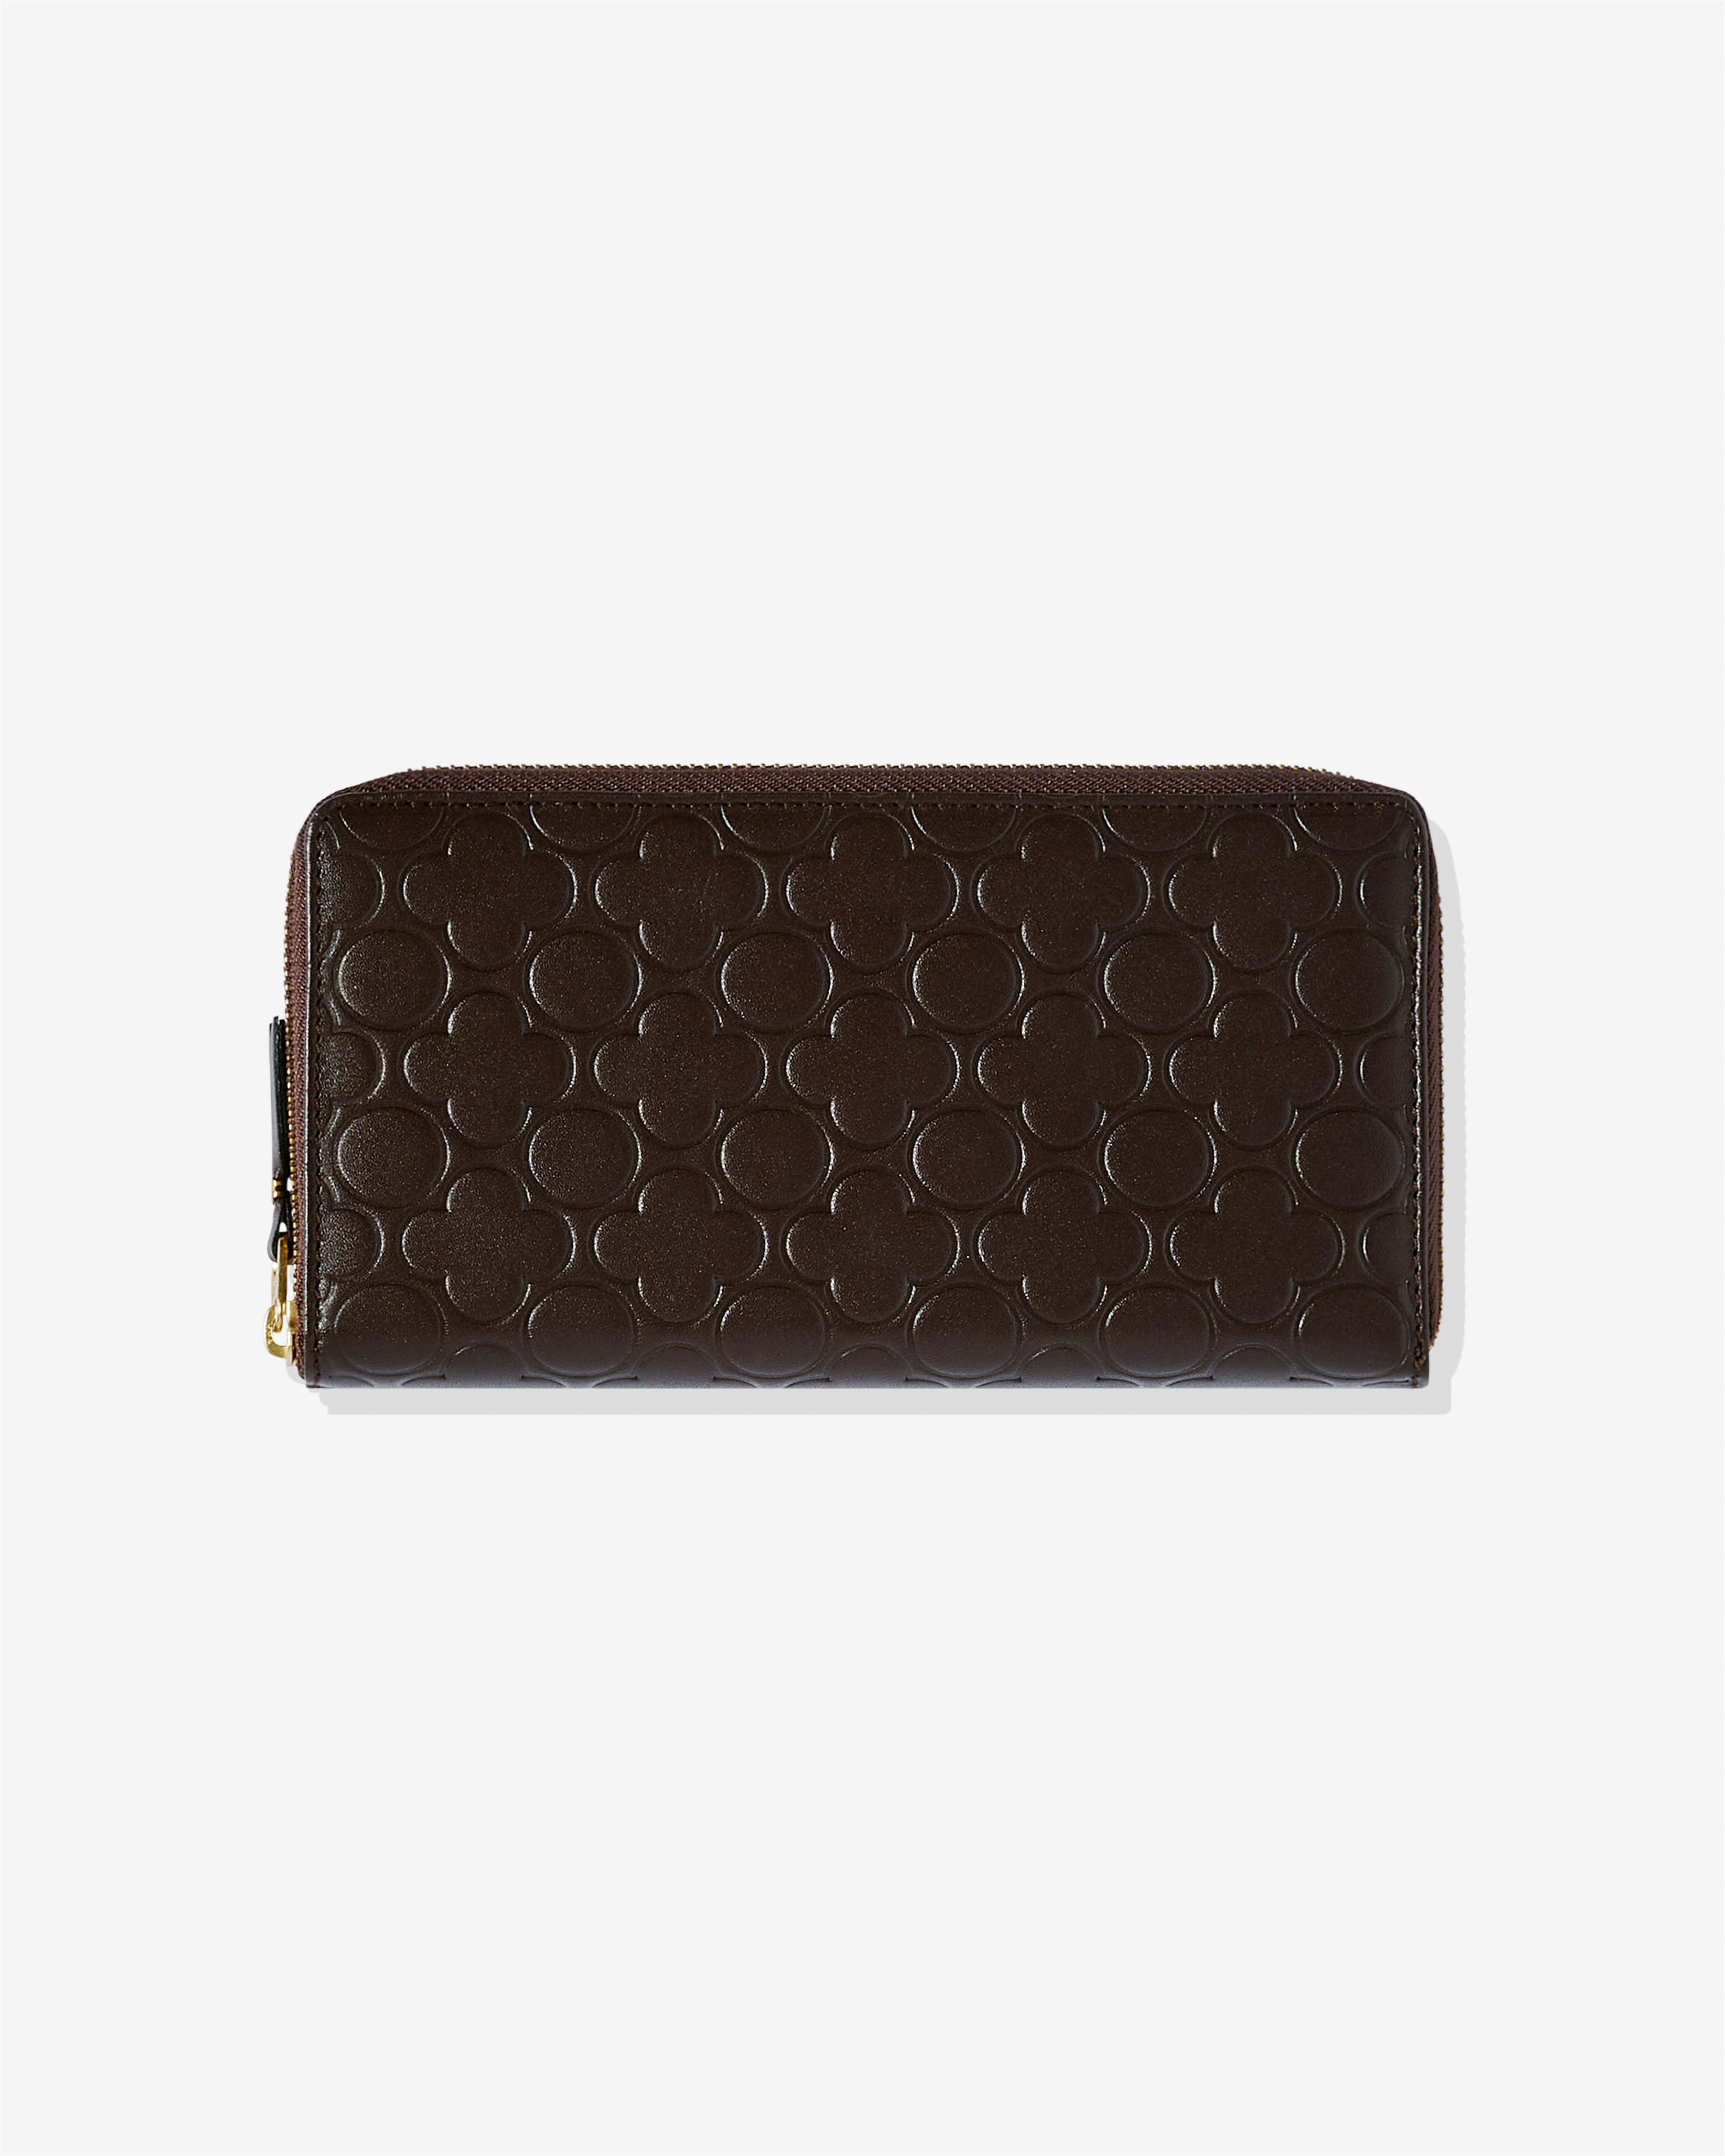 CDG Wallet - Embossed B Zip Around Wallet - (Brown SA010EB) by COMME DES GARCONS